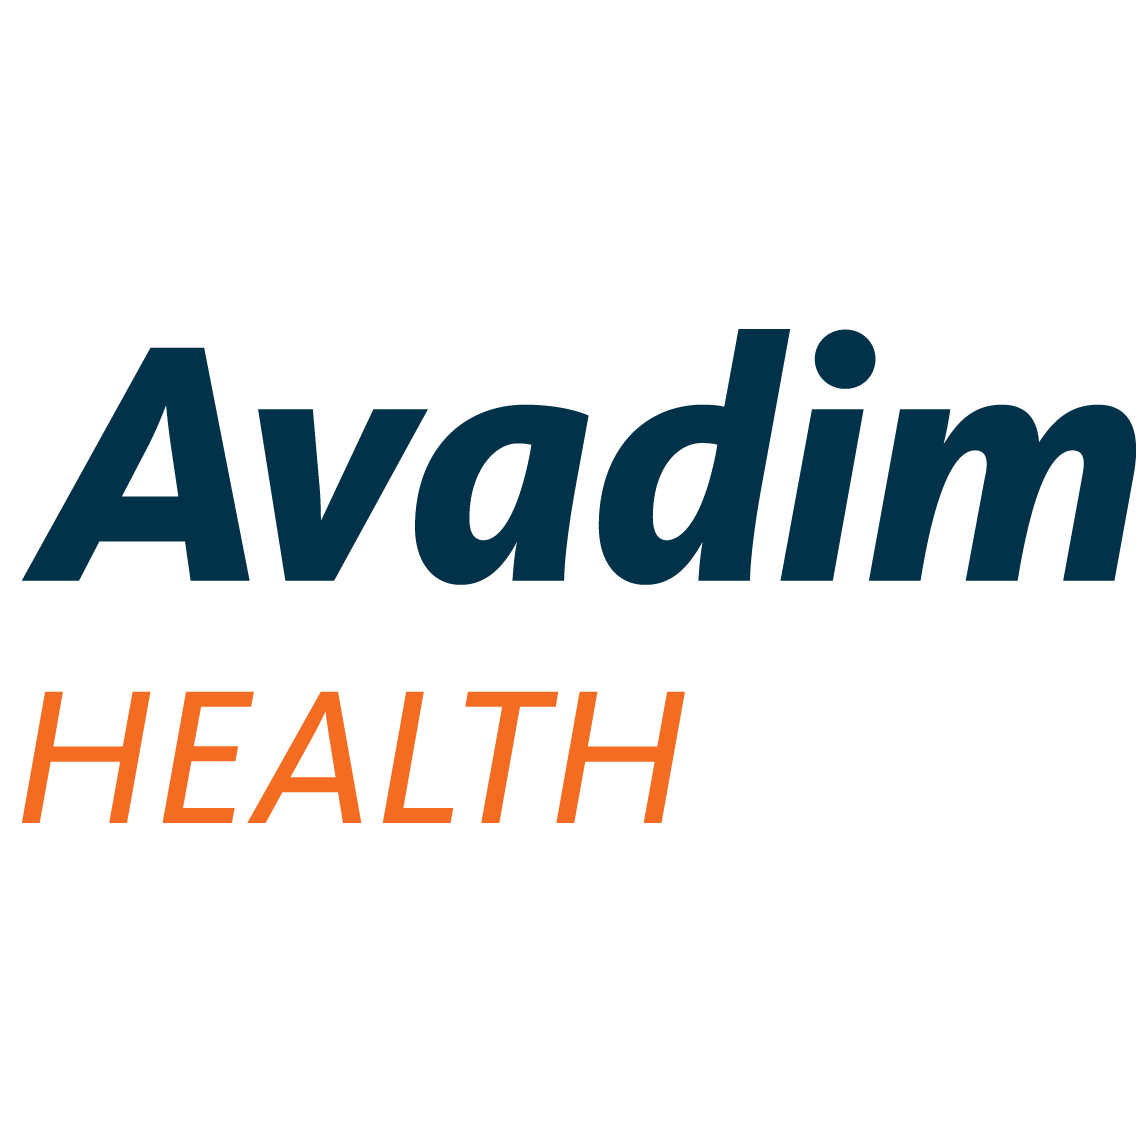 Avadim Health Podcast Series Part One: the Pain Factor - PPN Episode 760